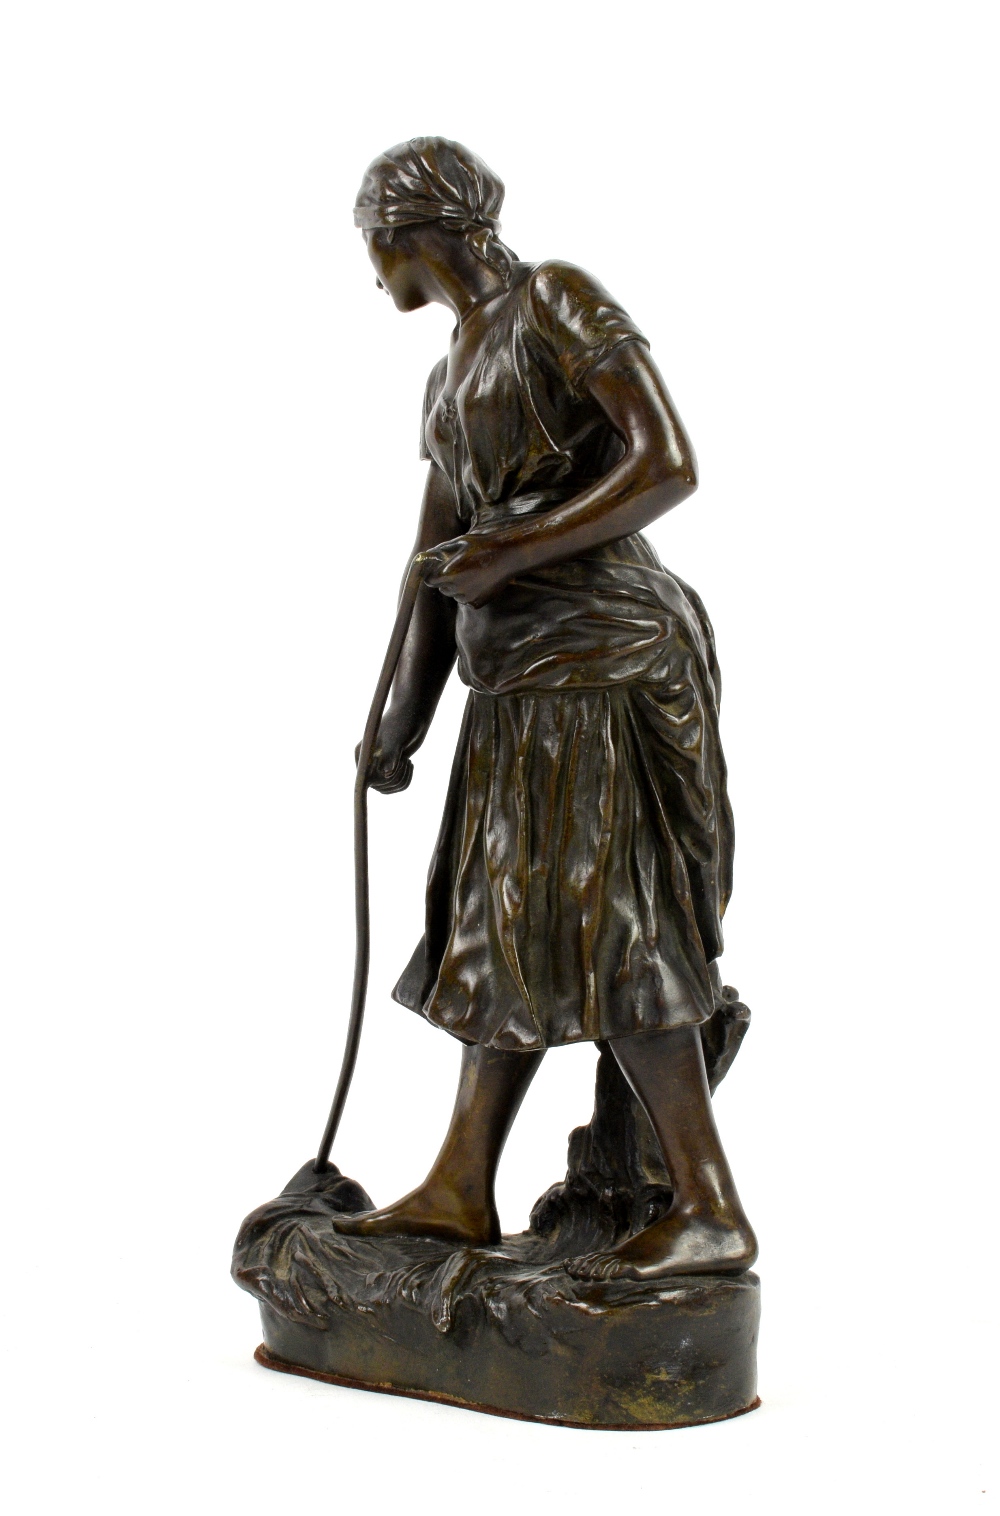 Cheze 19th century French bronze figure of a women working the land various foundry marks to base - Image 3 of 7